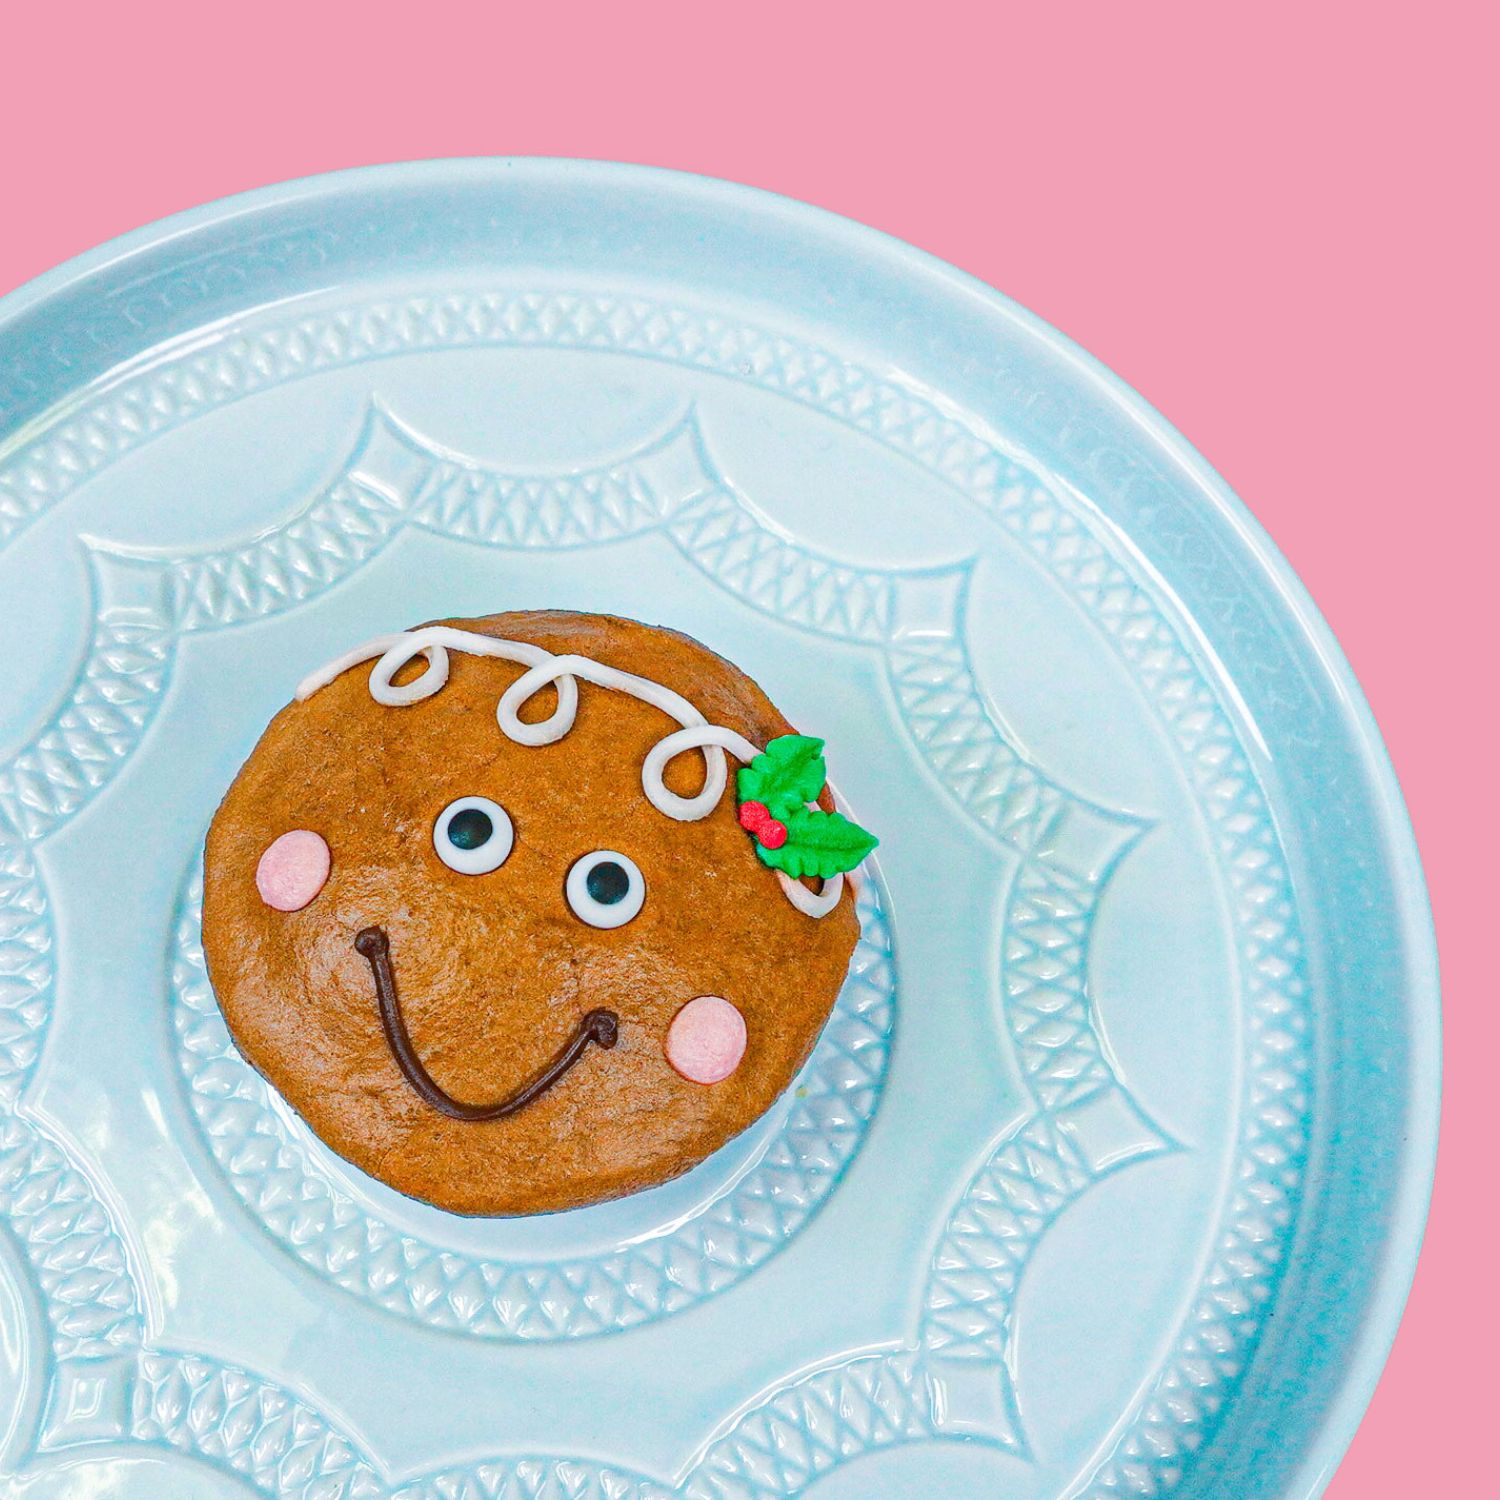 cupcake decorated to look like a gingerbread man